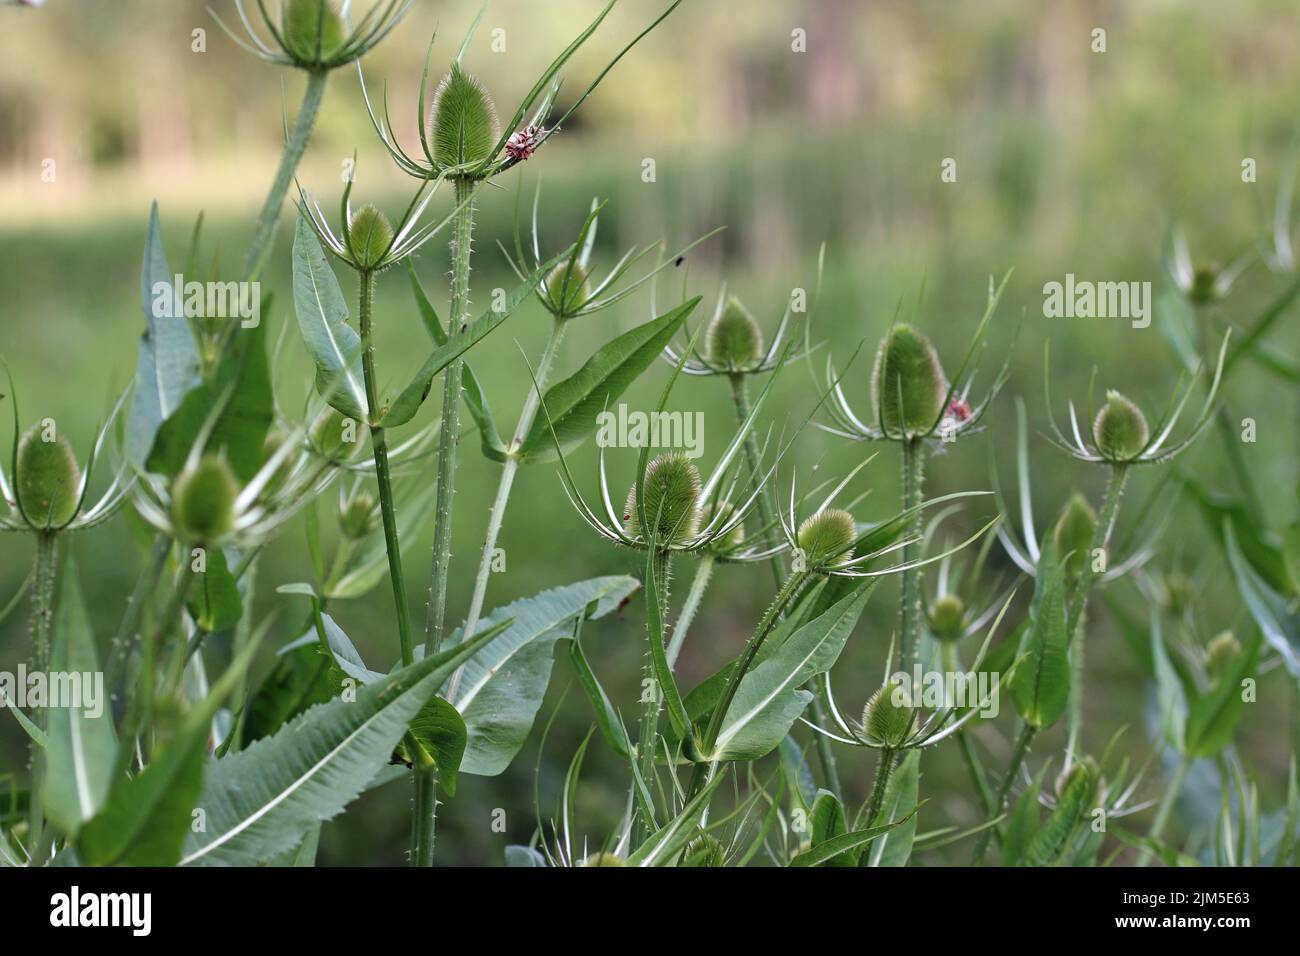 Teasel, Dipsacus fullonum, plant flowering spikes with a blurred background of leaves and a marsh. Stock Photo